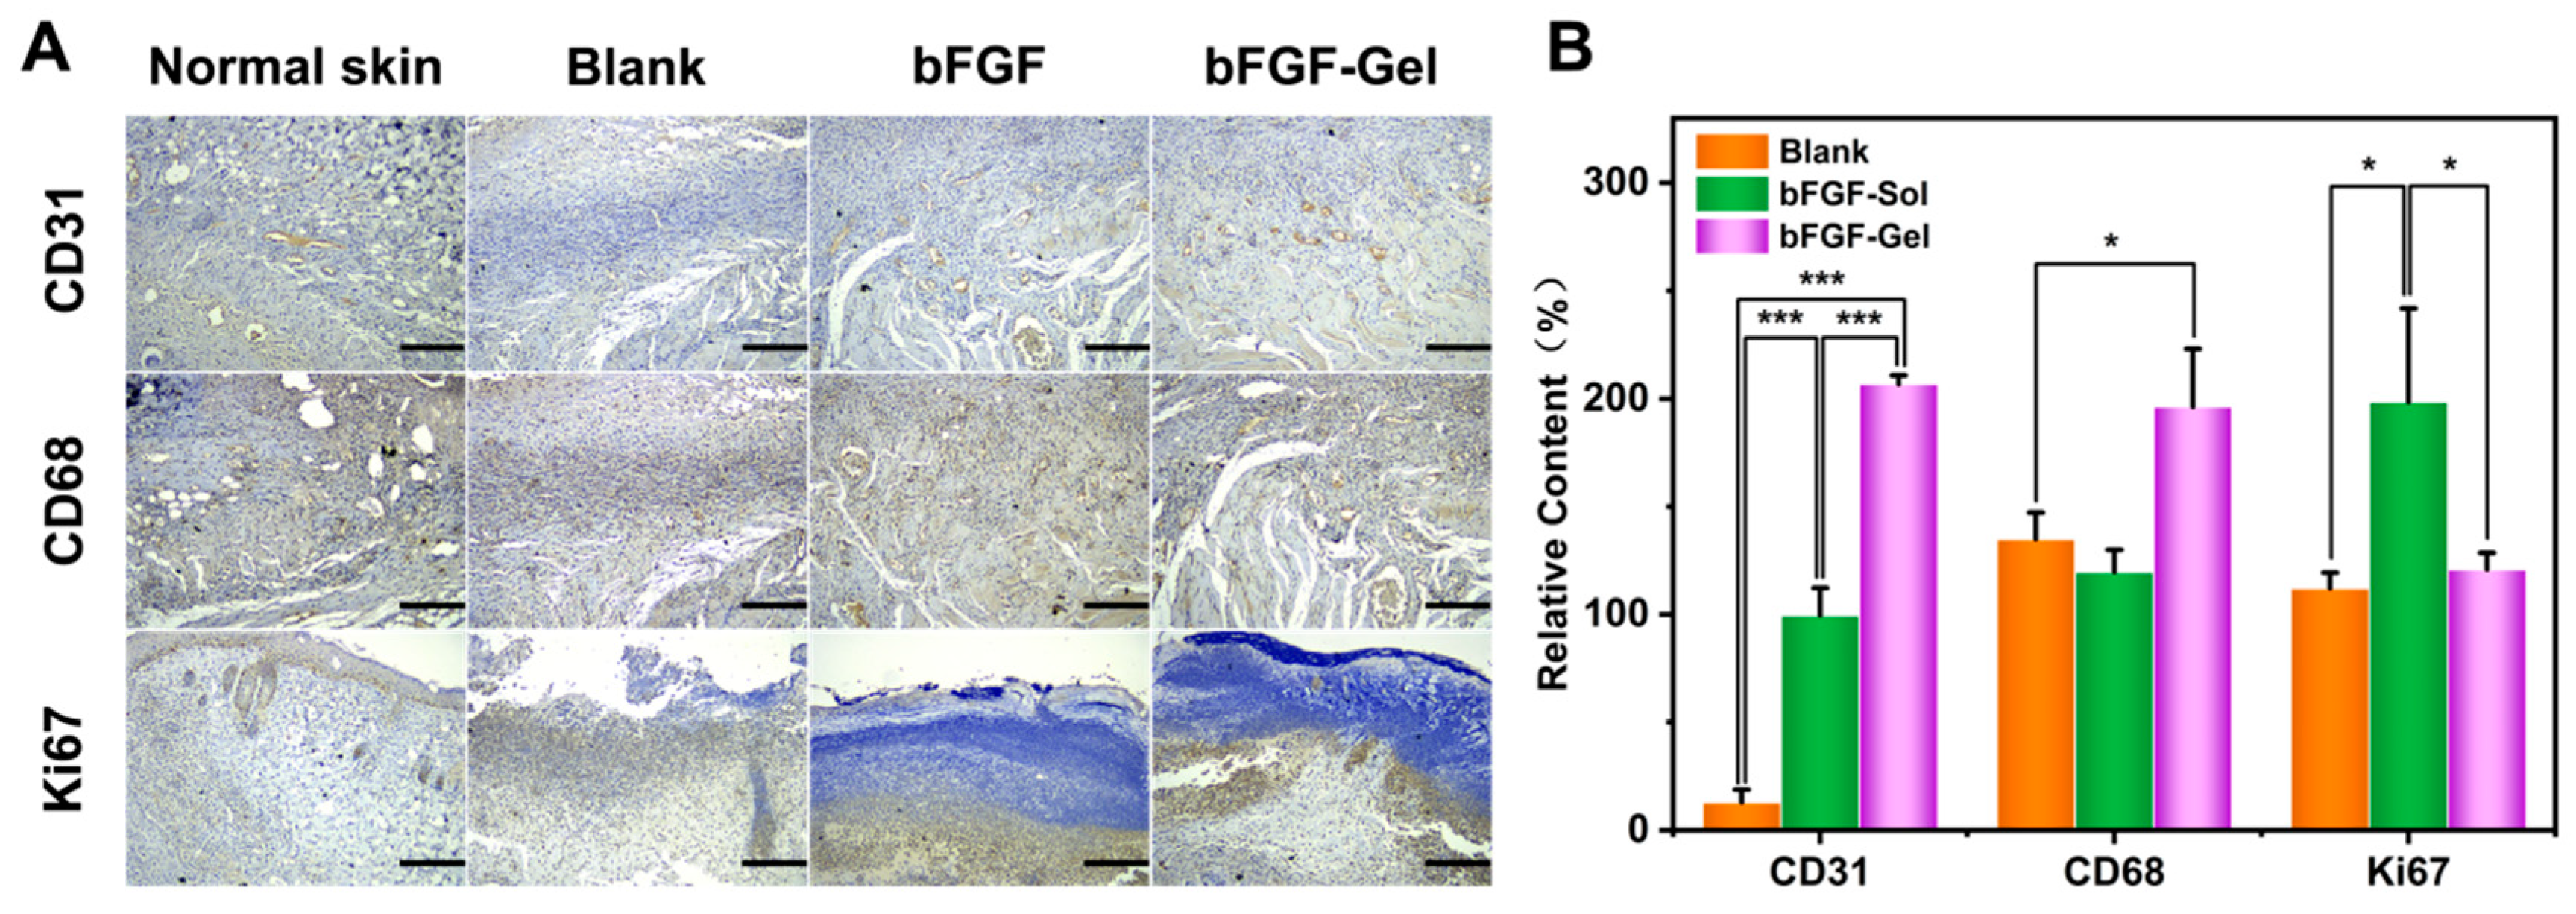 Molecules | Free Full-Text | Hydrogel Dressing Containing Basic Fibroblast  Growth Factor Accelerating Chronic Wound Healing in Aged Mouse Model